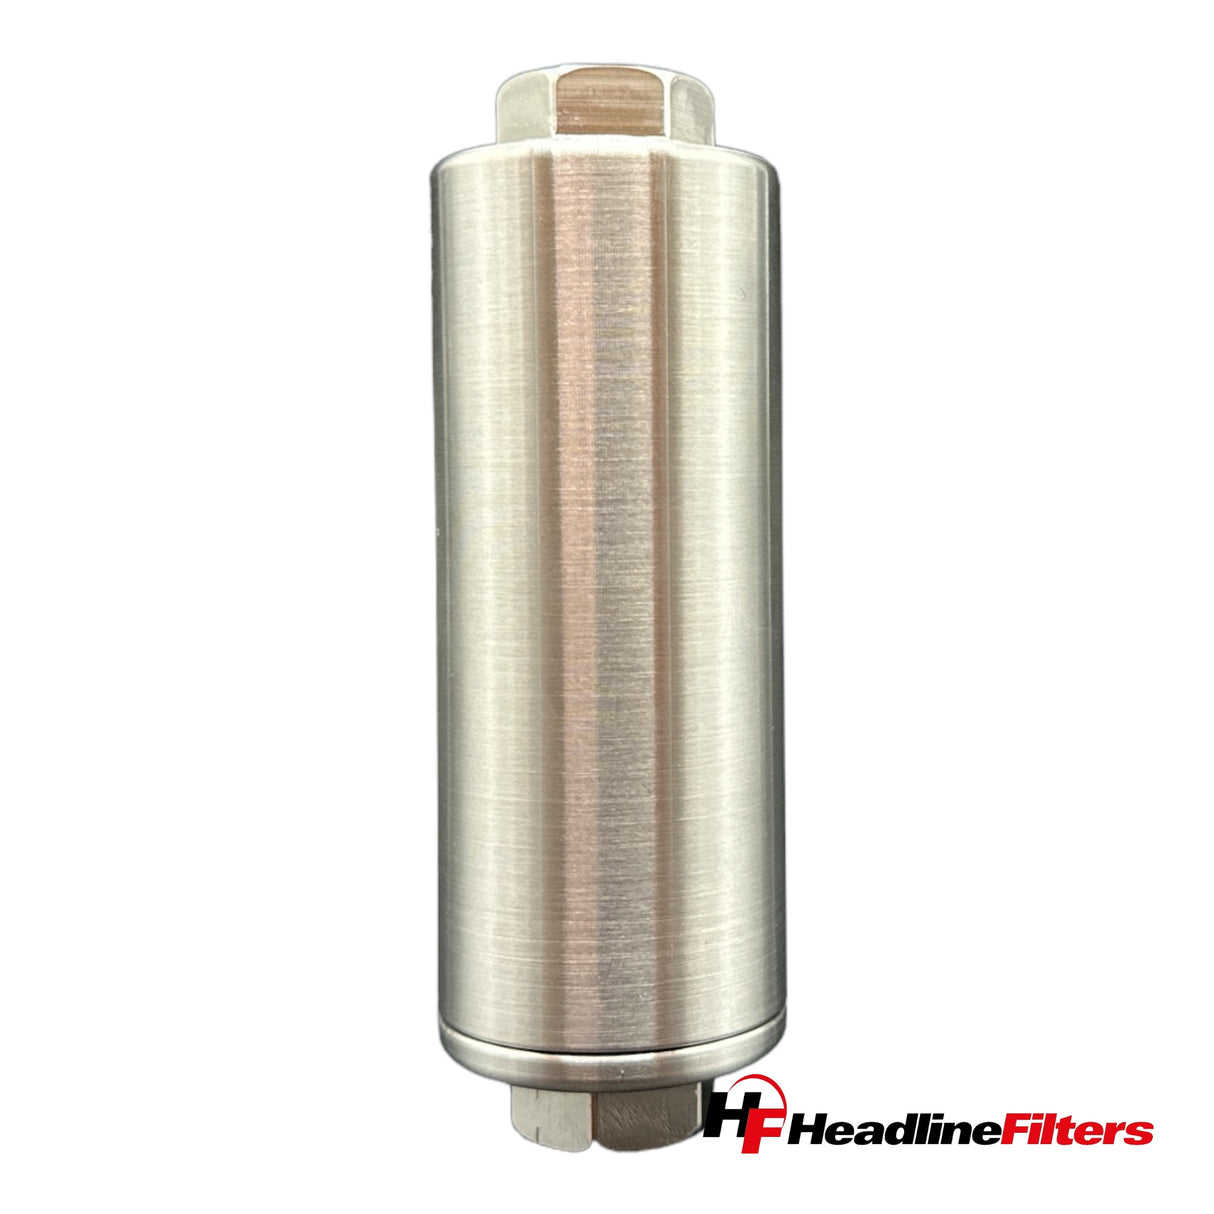 Stainless Steel Filter Housing - Model 126IL